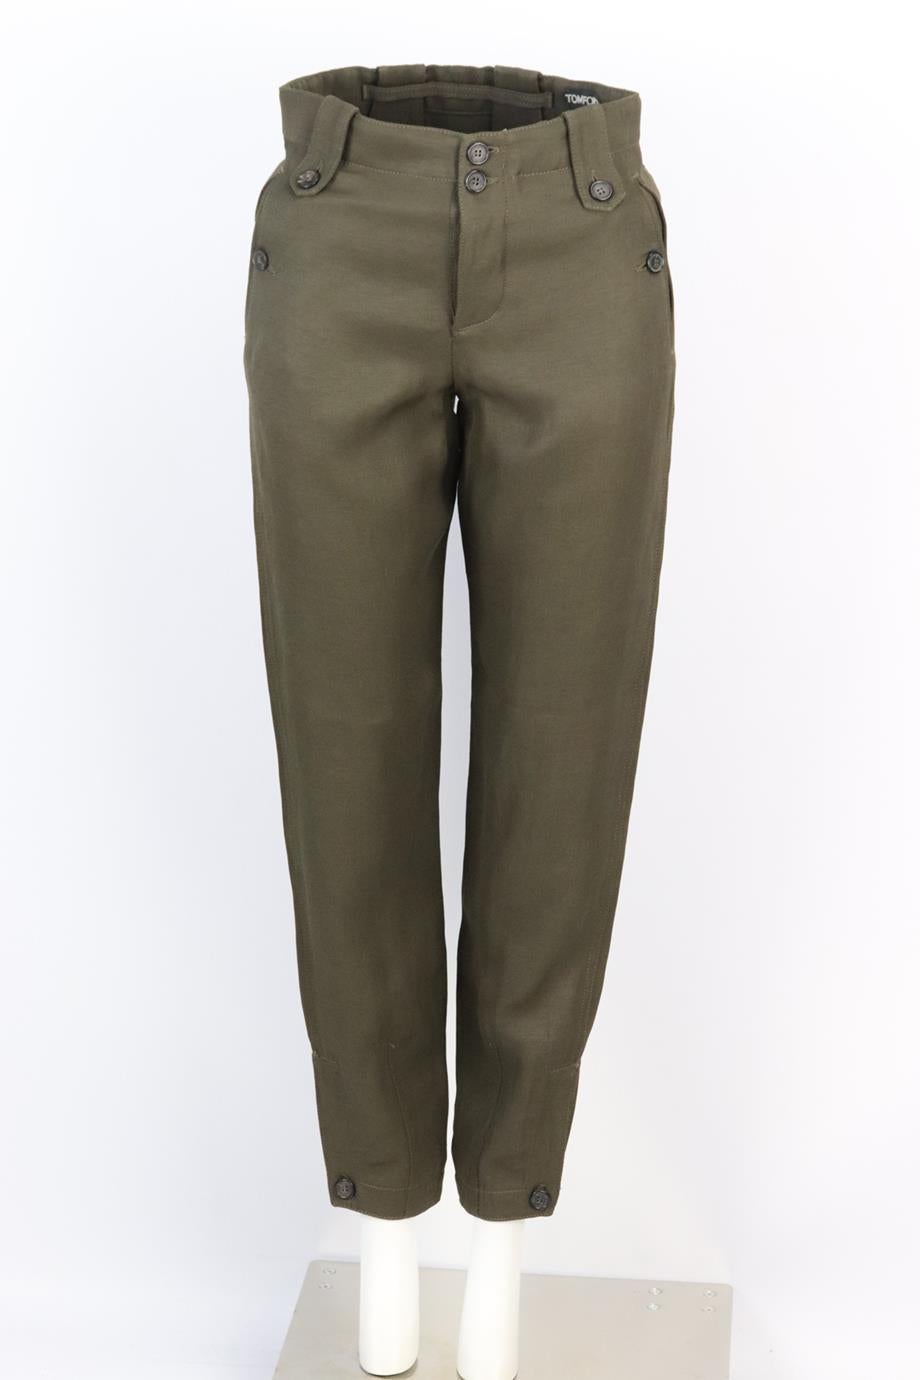 Tom Ford linen blend tapered pants. Green. Button fastening at front. 70% Acetate, 30% linen; lining: 100% cupro. Size: IT 36 (UK 4, US 0, FR 32). Waist: 28.4 in. Hips: 41 in. Length: 38.75 in. Inseam: 30 in. Rise: 10.5 in. Very good condition - No